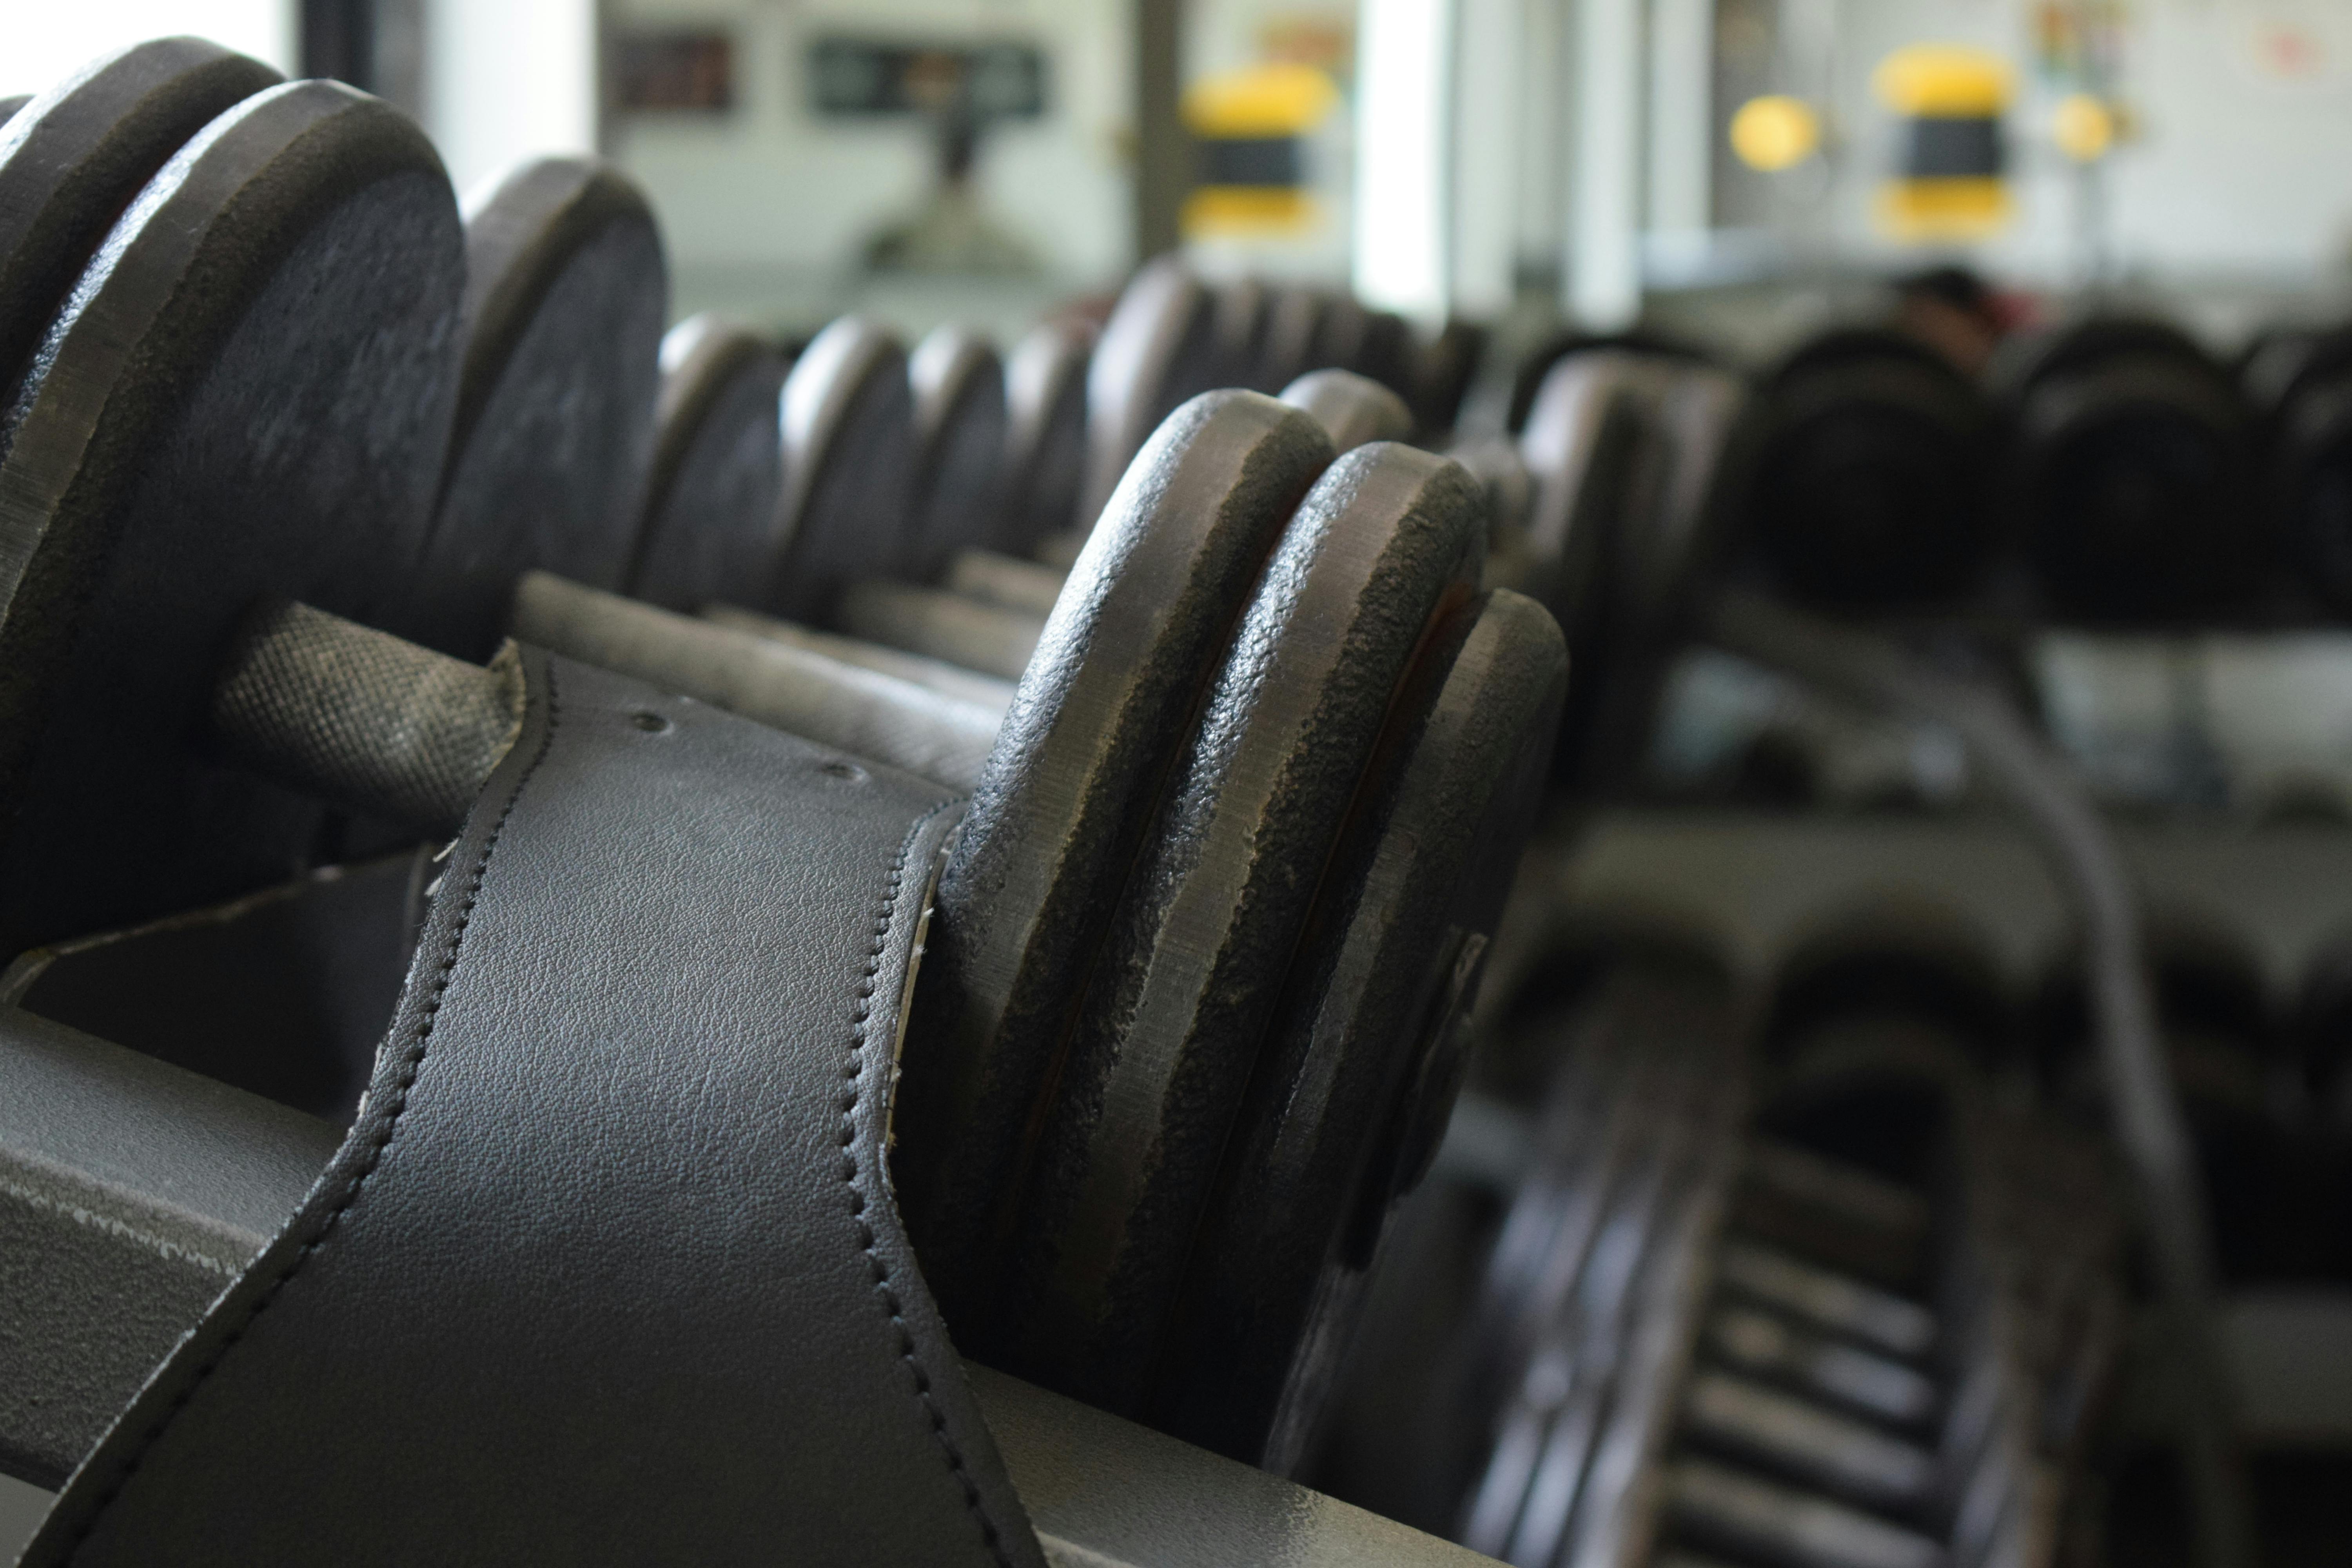 Free stock photo of dumbbells, old school gym, weight rack